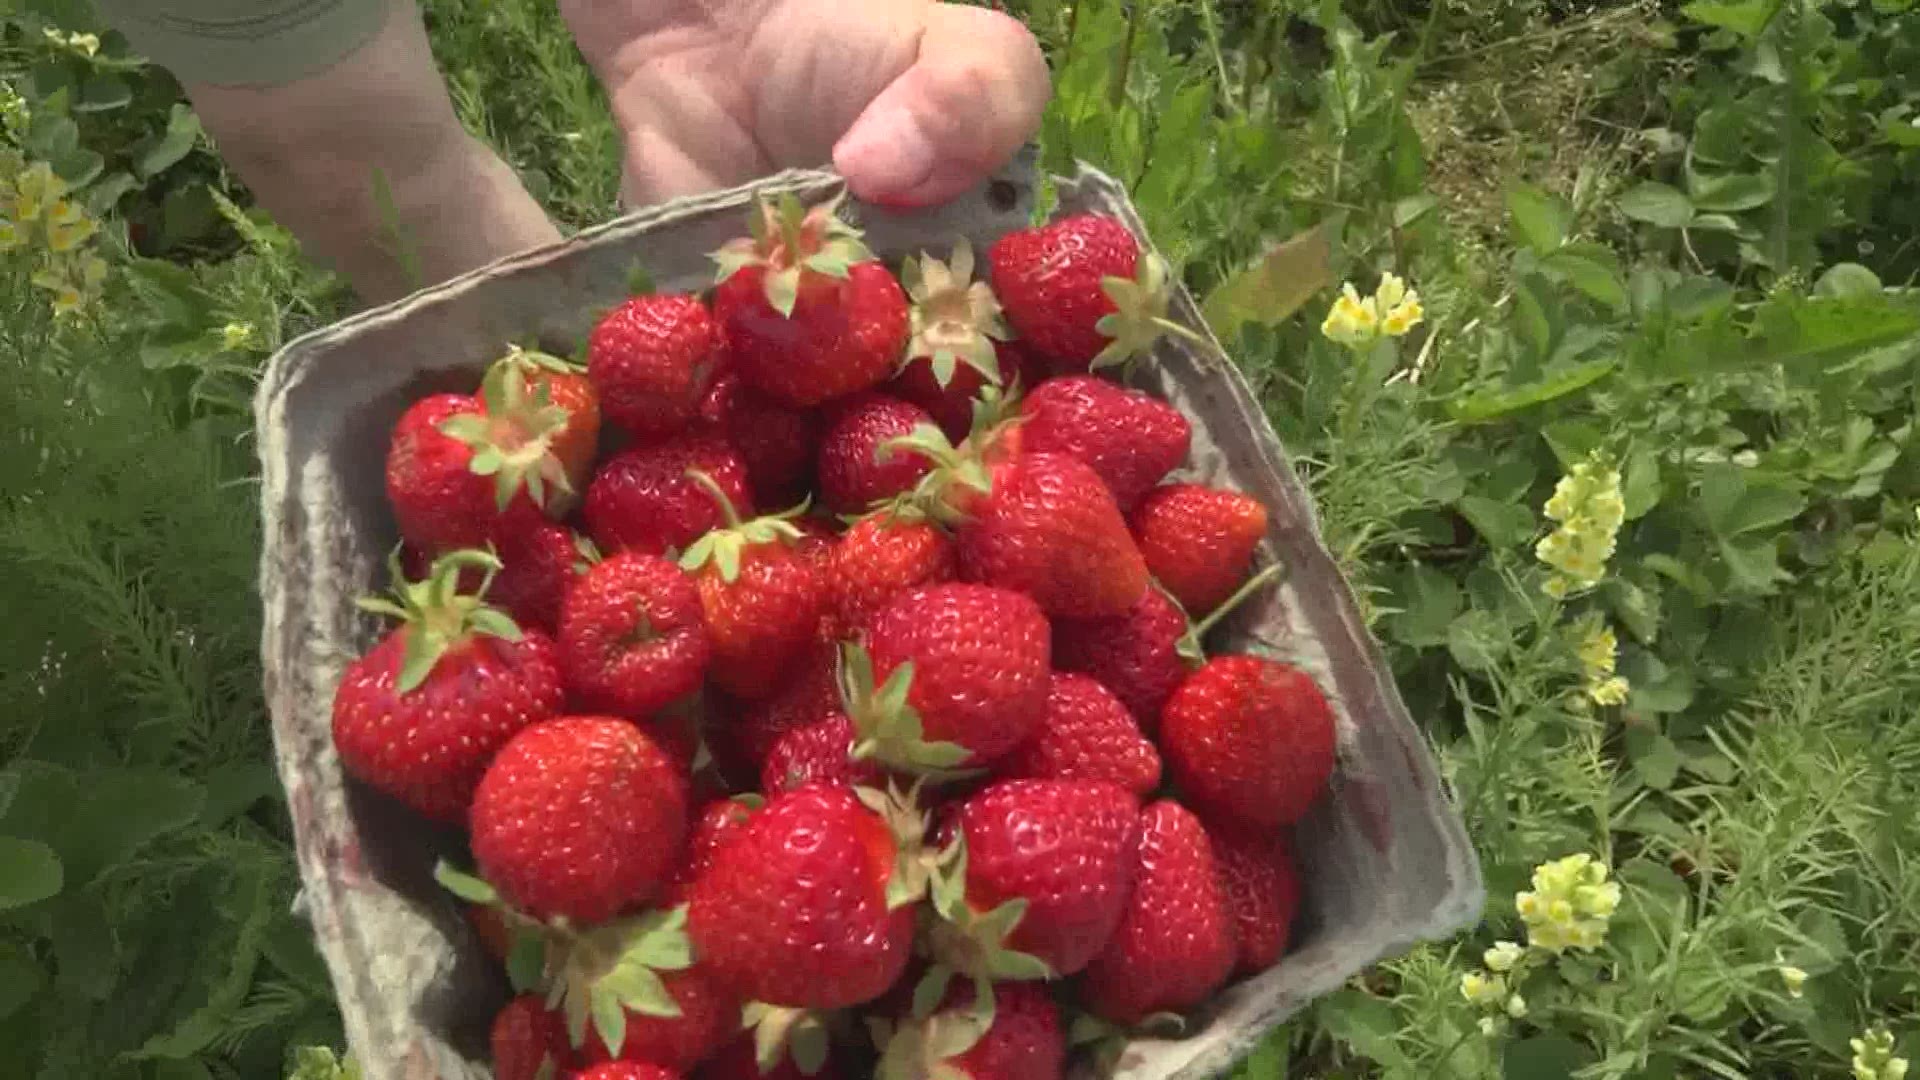 RJ Hall's Family Farm in Corinth will have fresh ripe strawberries for the next 2 weeks.